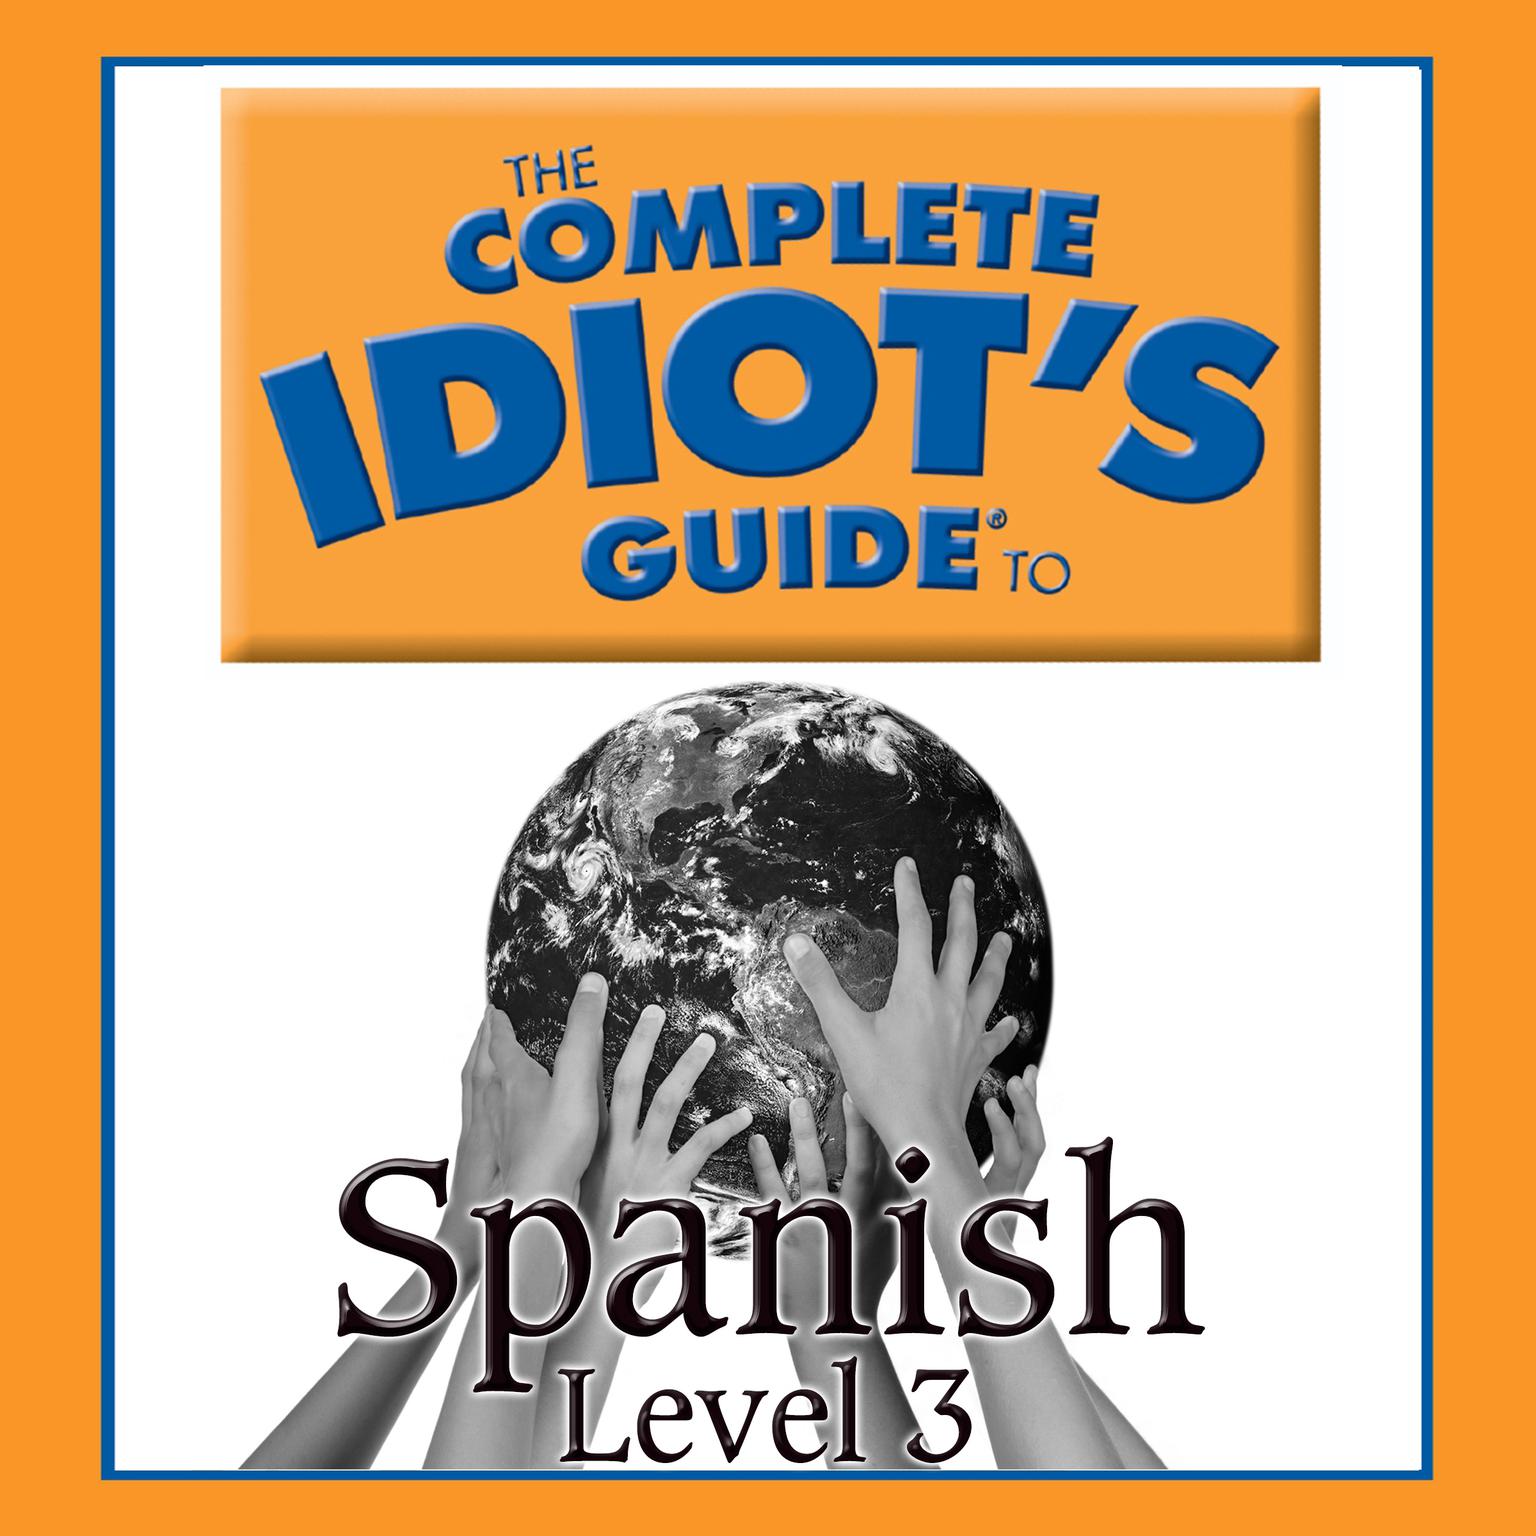 The Complete Idiot’s Guide to Spanish: Level 3 Audiobook, by Linguistics Team